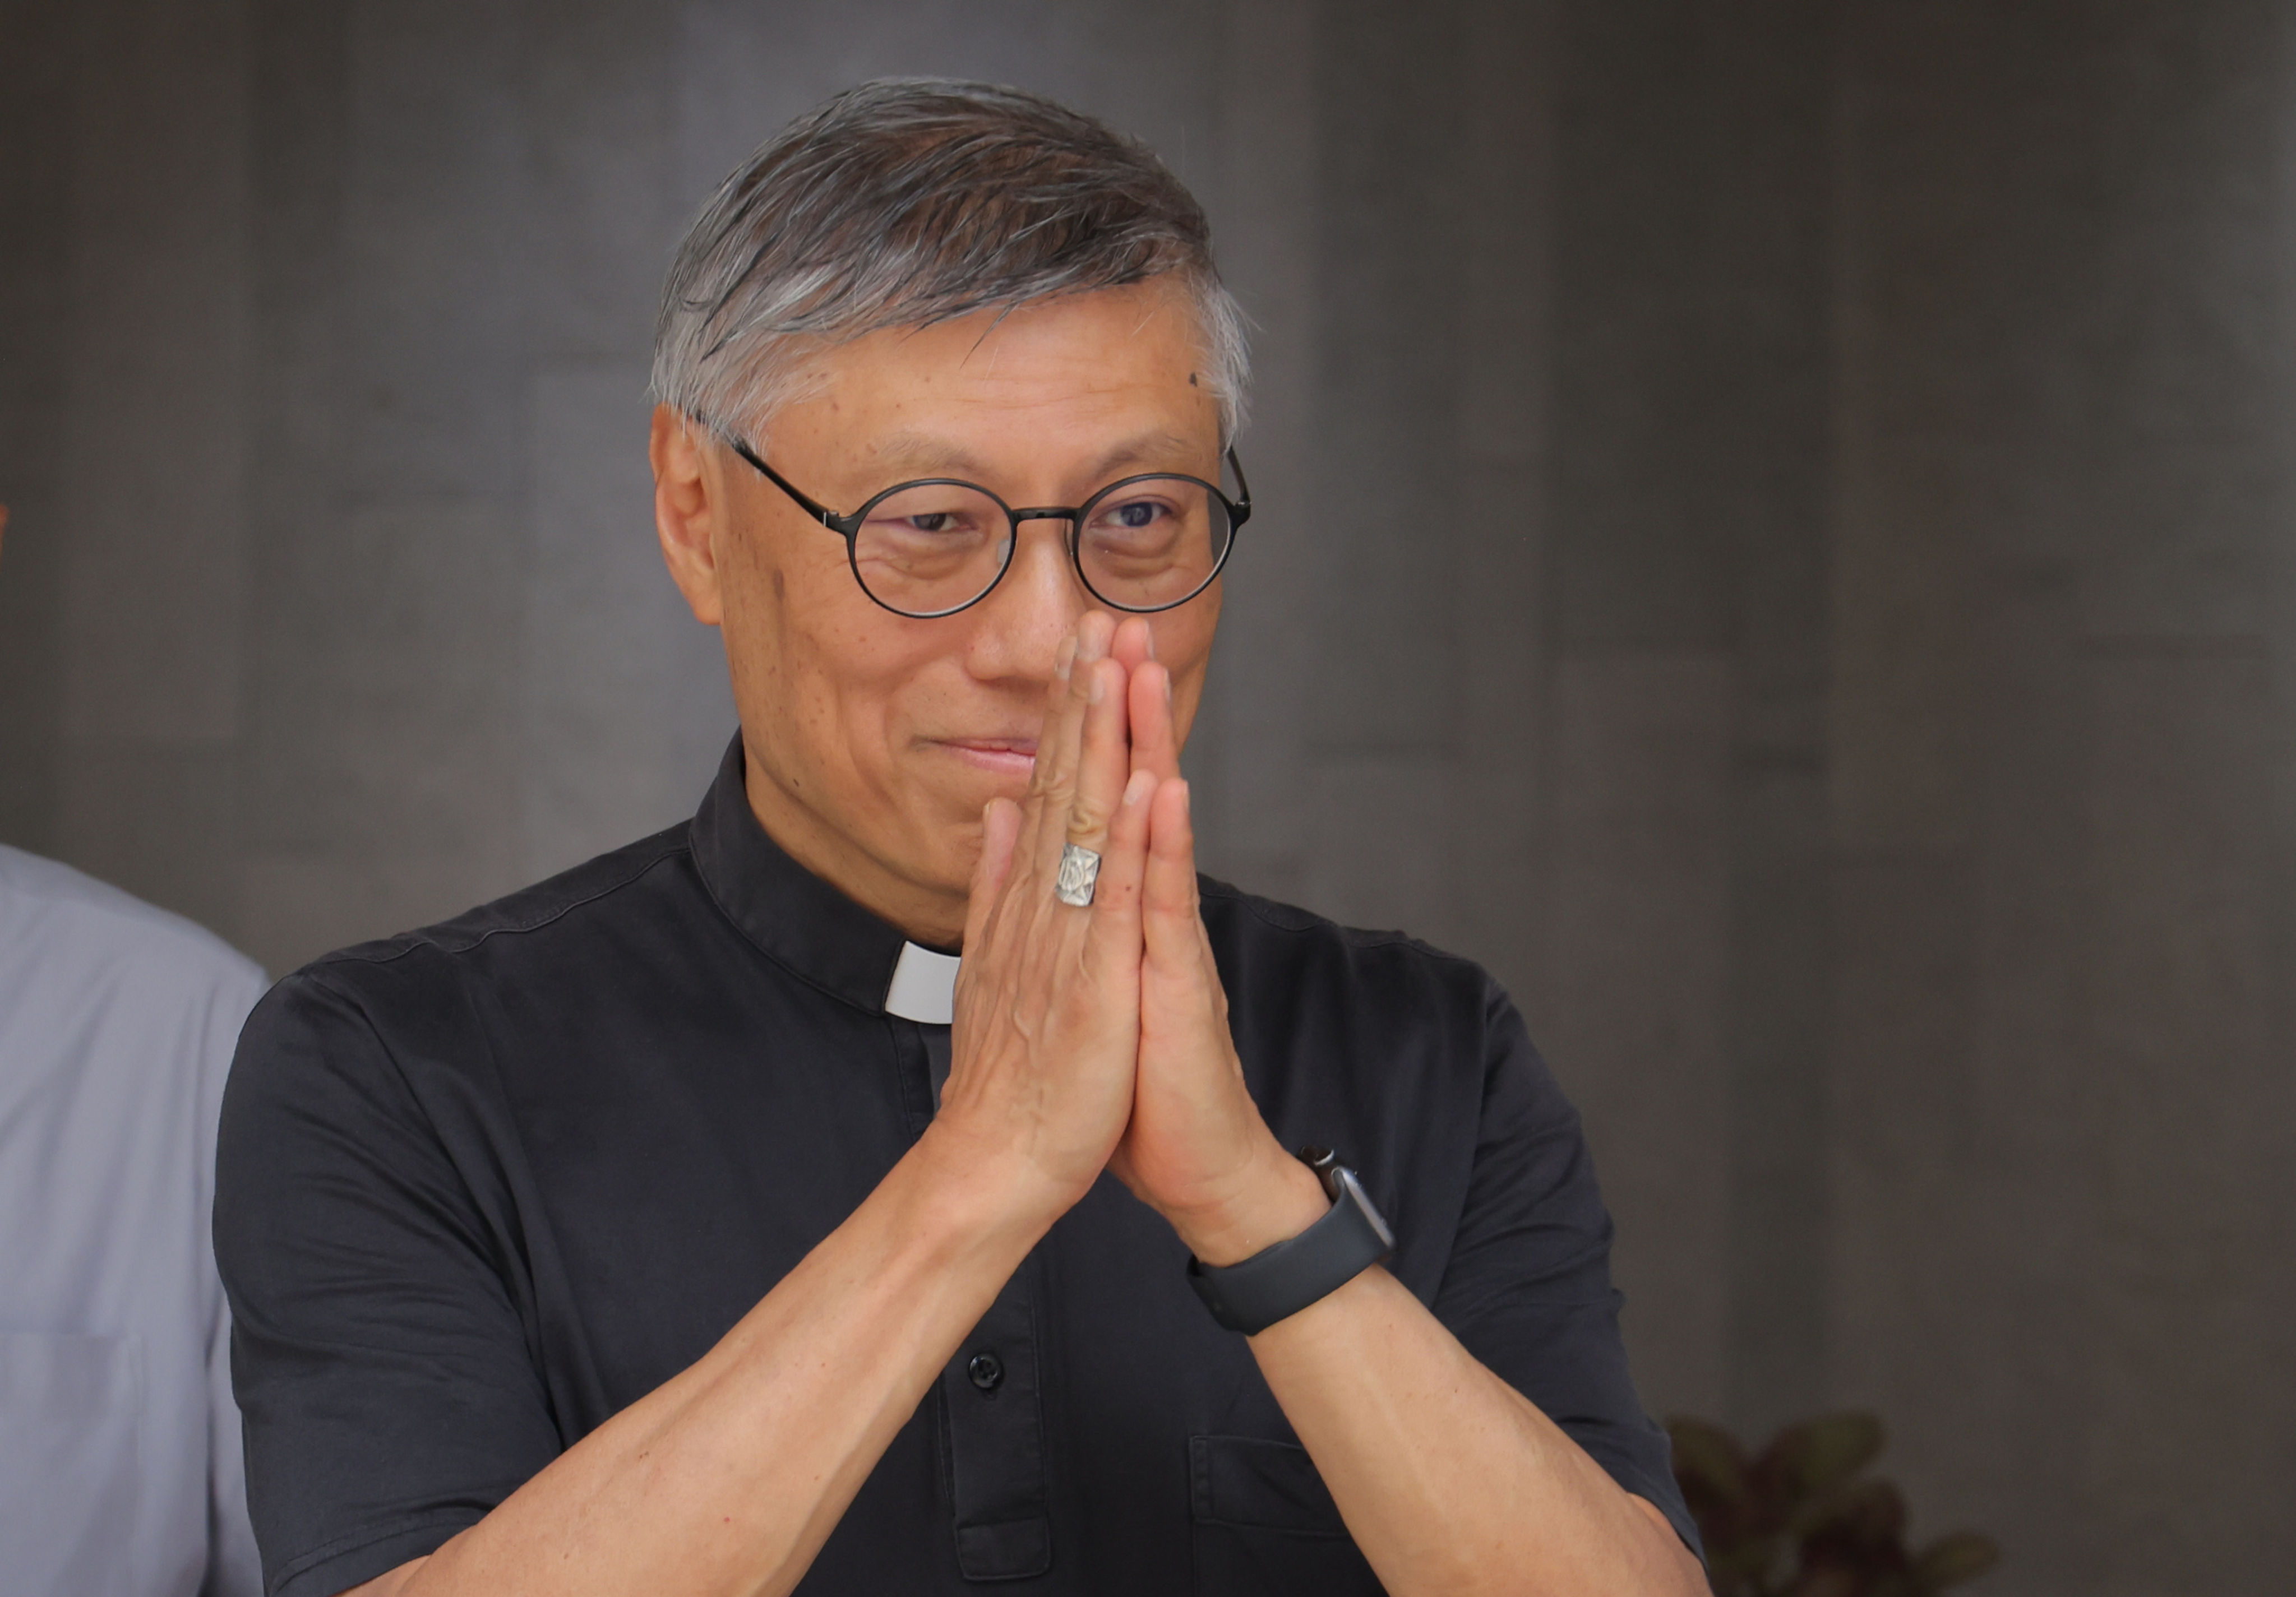 Stephen Chow, Hong Kong’s Catholic bishop, has called for forgiveness ahead of 35th anniversary of the Tiananmen Square crackdown. Photo: Jelly Tse